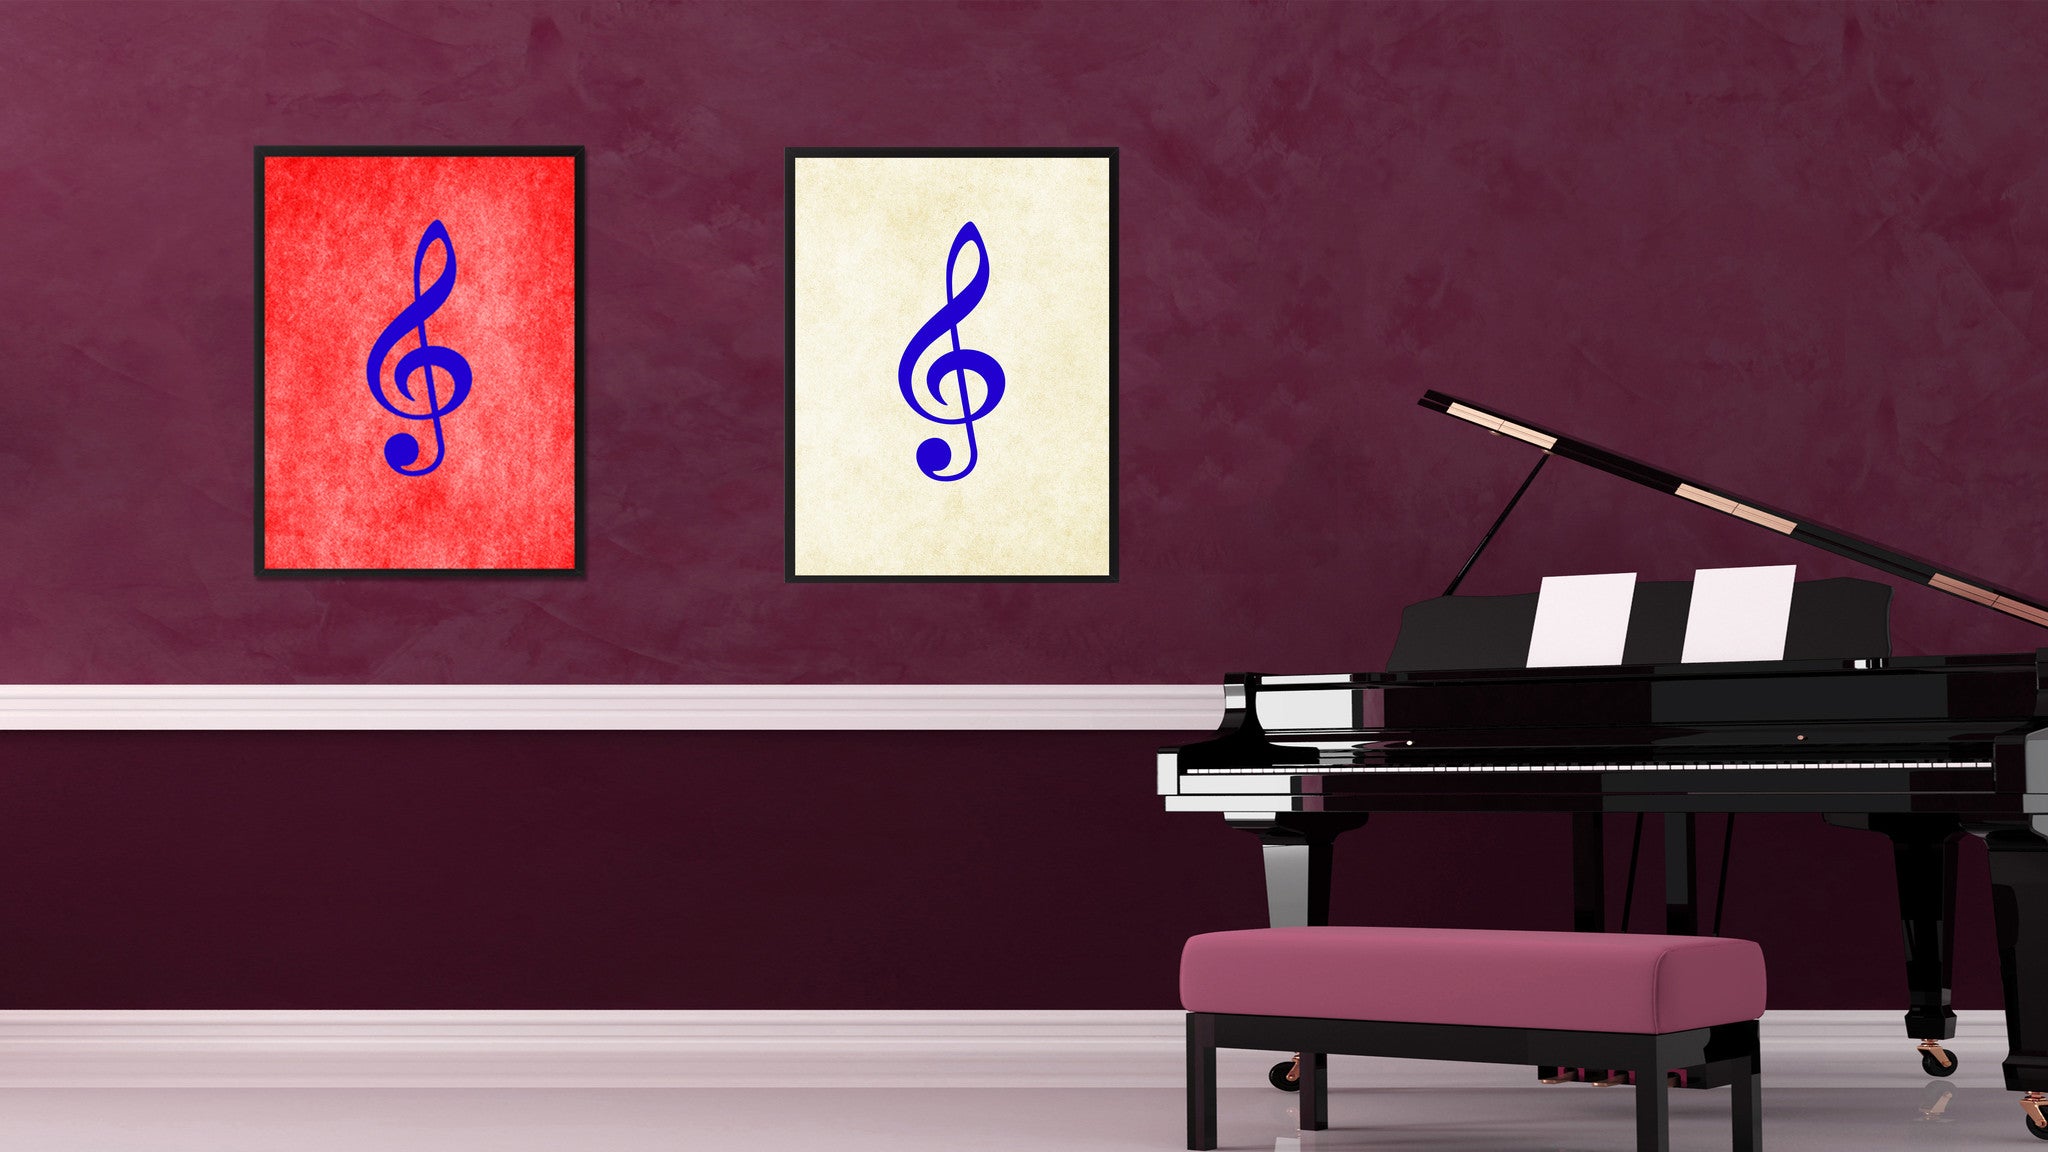 Treble Music White Canvas Print Pictures Frames Office Home Décor Wall Art Gifts